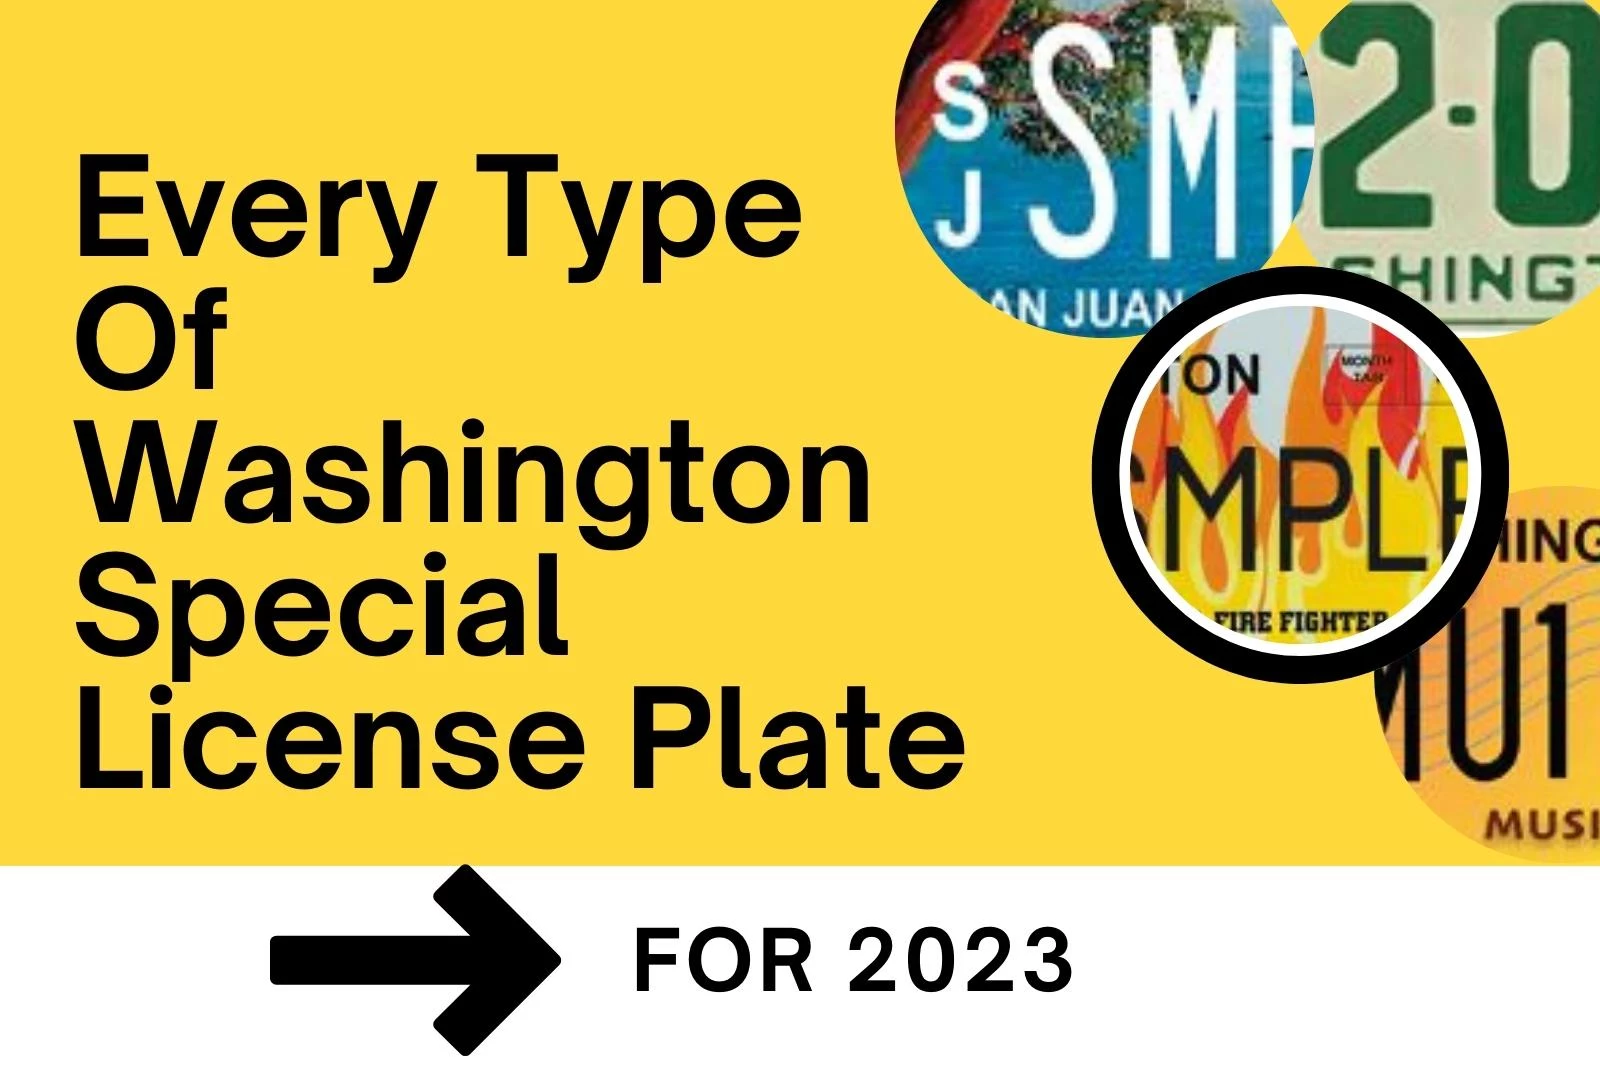 Here's A Look At Every Type of Washington License Plate for 2023